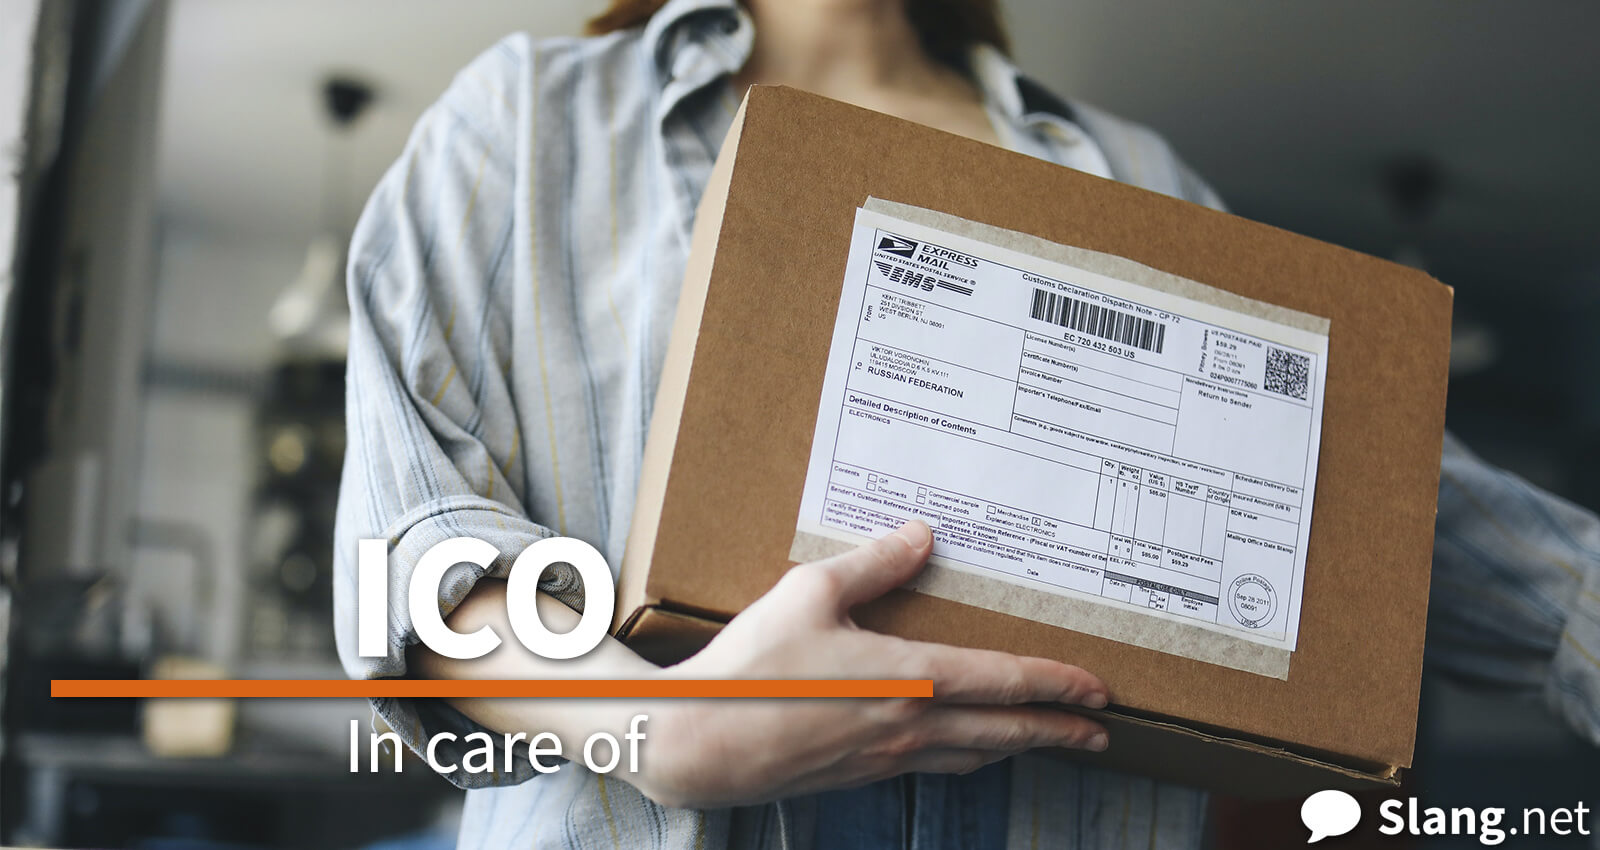 On letters and packages, ICO stands for &quot;in care of&quot;